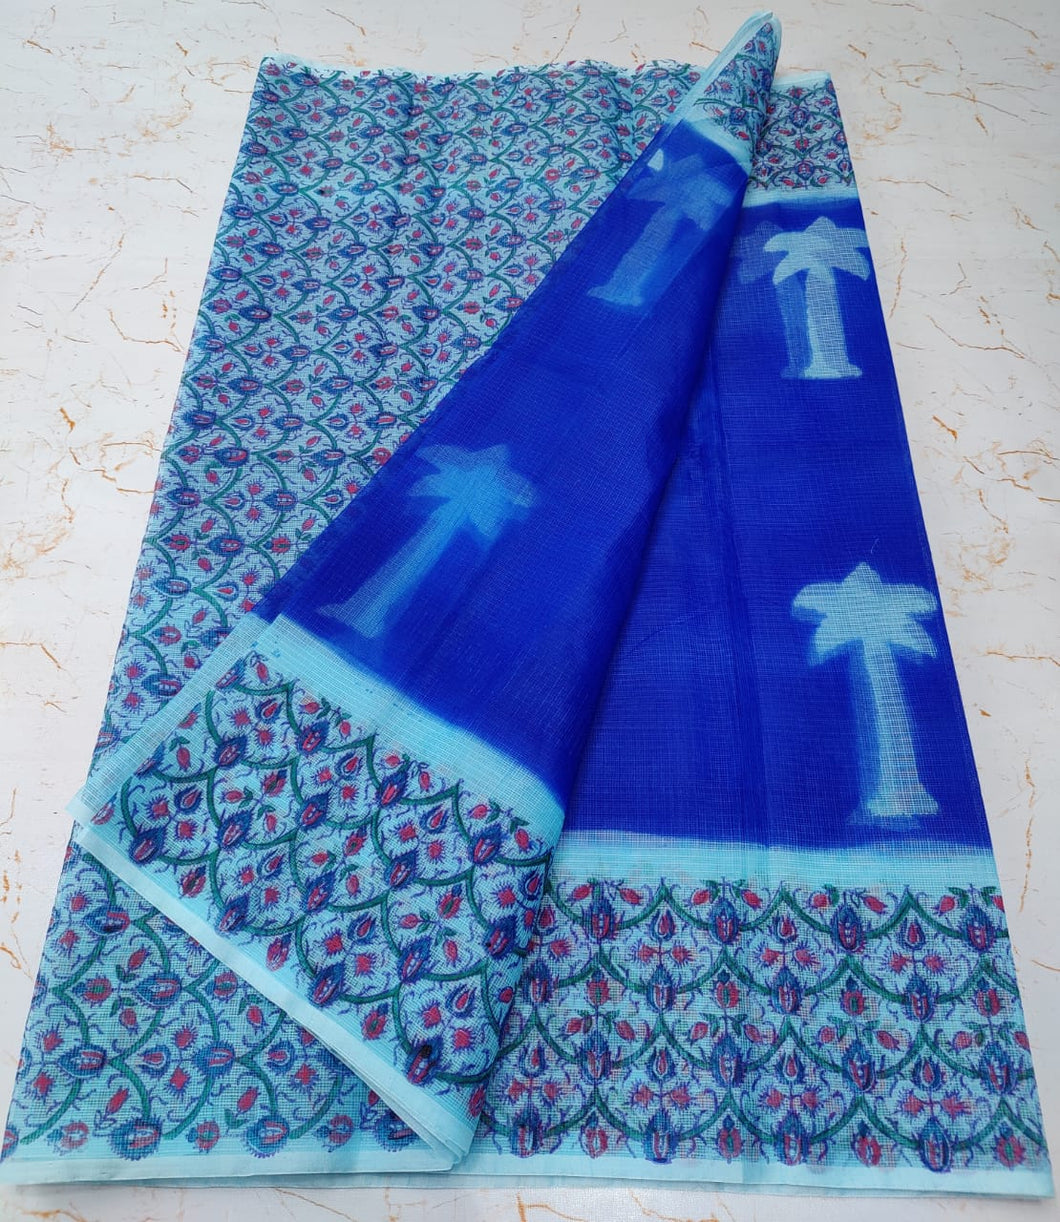 Exquisite Royal Blue Colored Tree KotaDoria Dye Block Printed Cotton Saree With Running Blouse